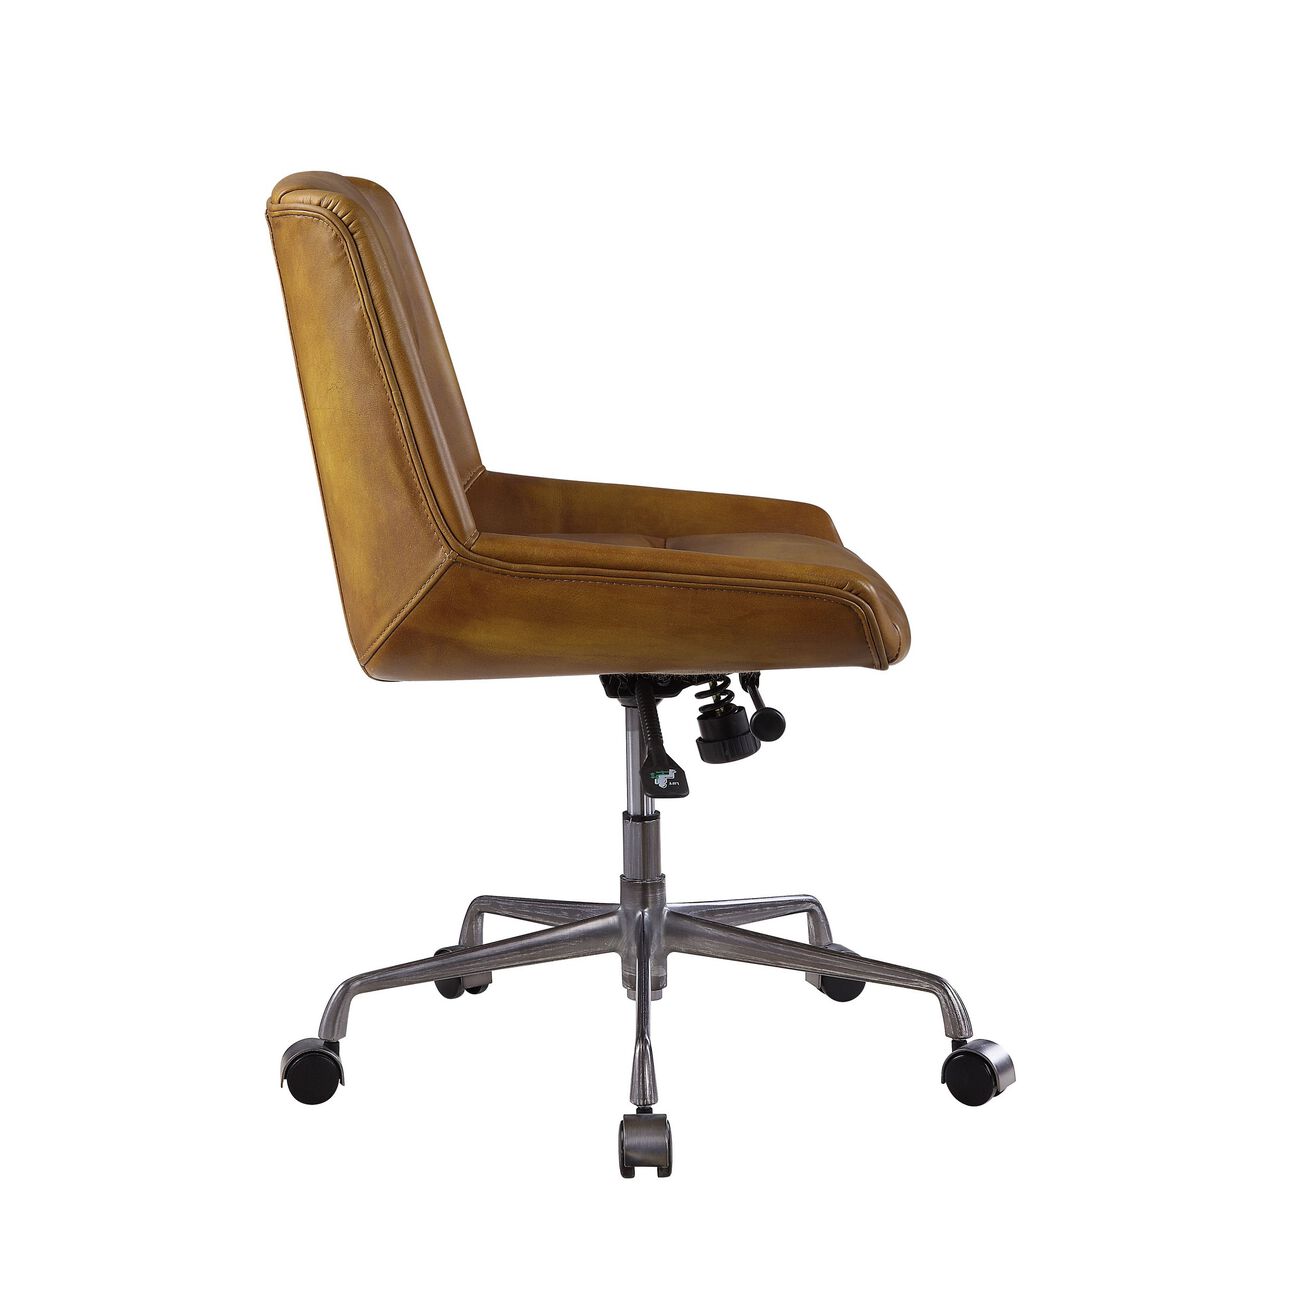 Swivel Leatherette Office Chair with Star Base and Casters,Brown and Silver